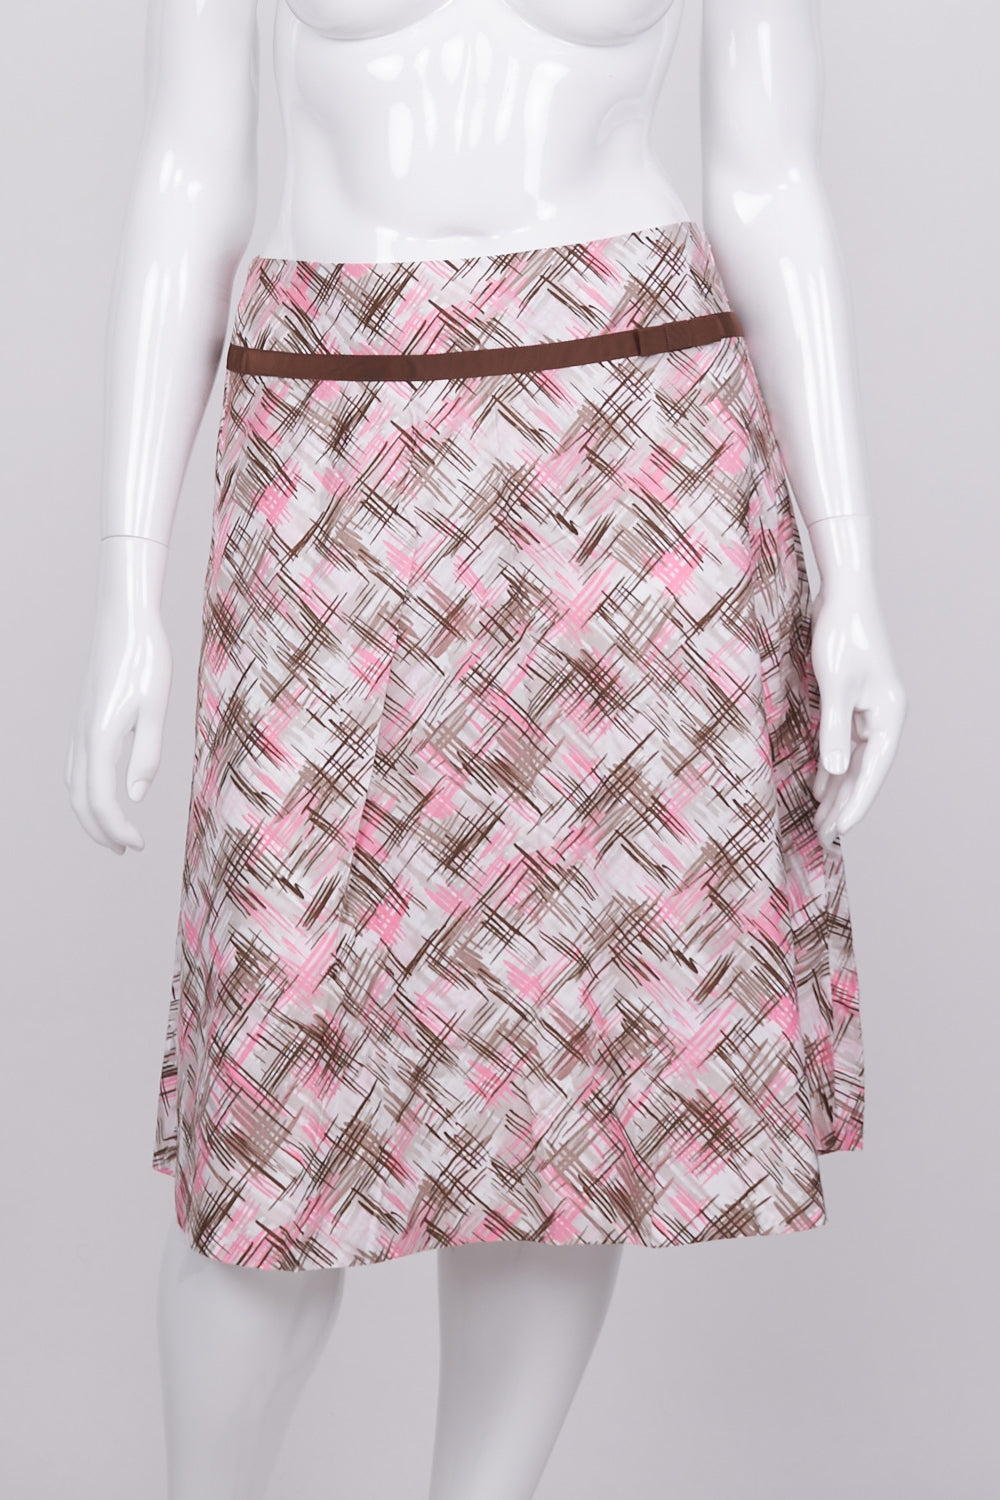 Jacqui E Pink And Brown Patterned Skirt 14